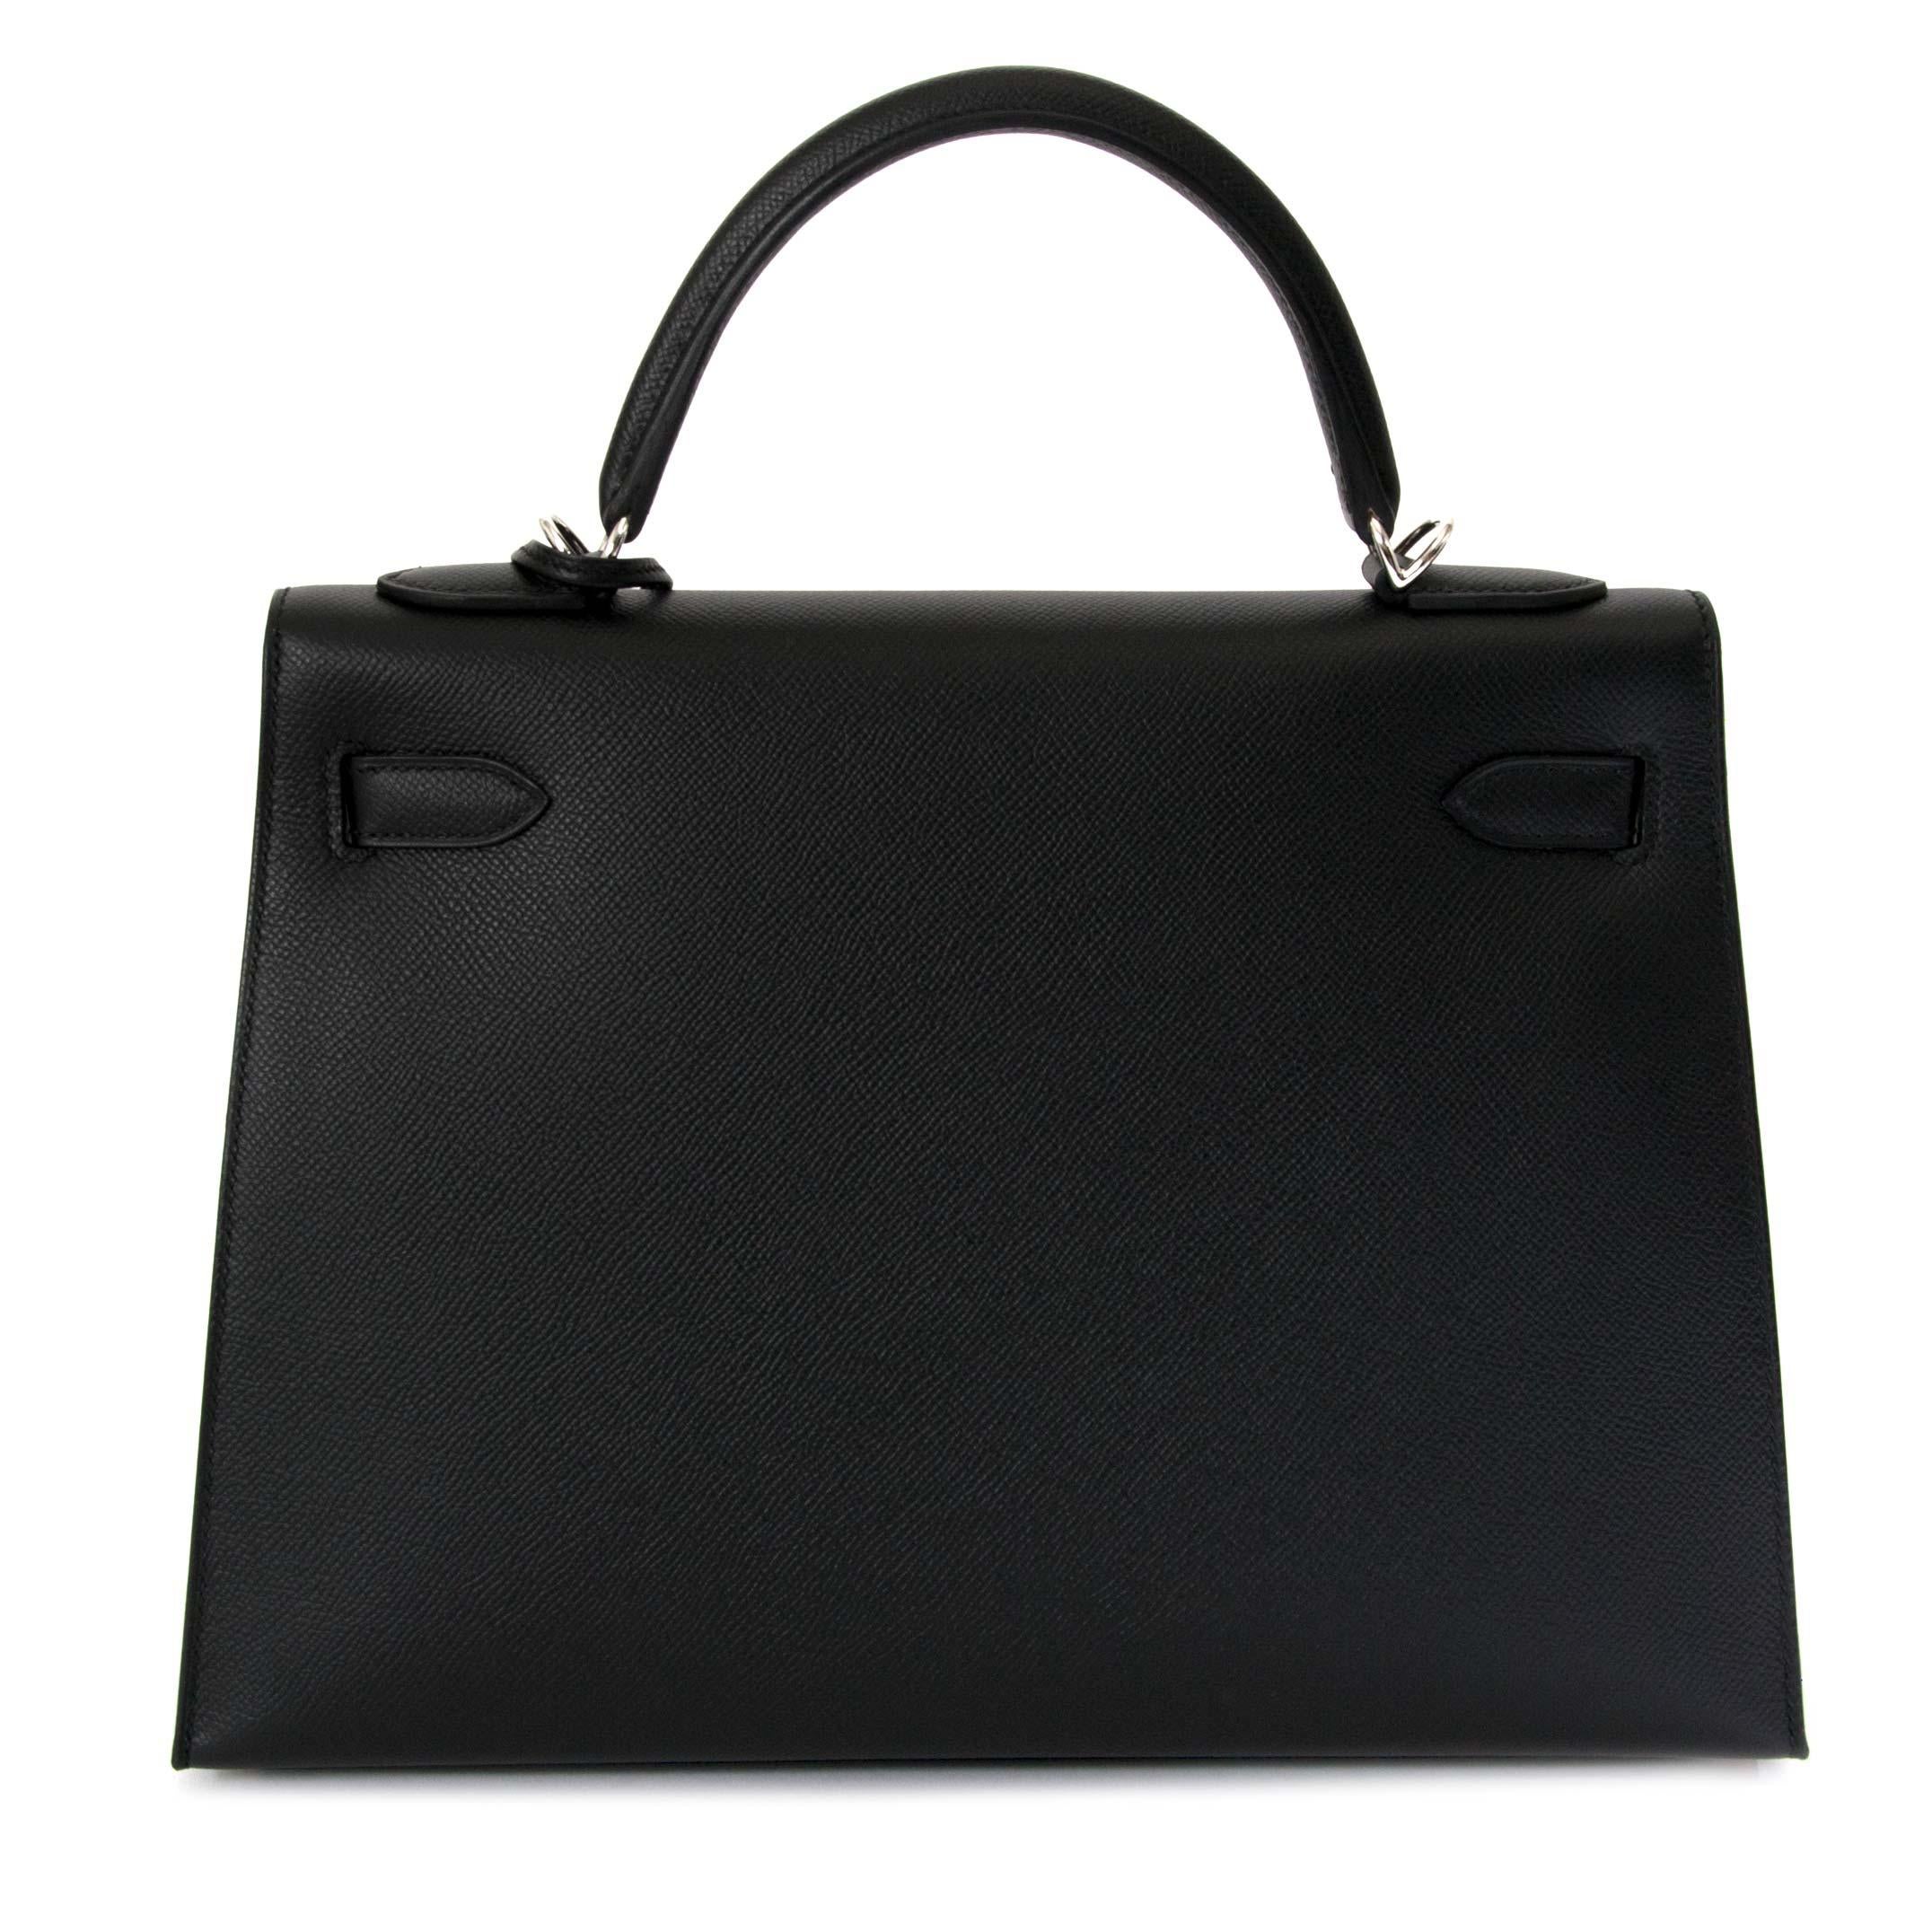 Hermès Kelly 32 Black Epsom PHW

The timeless elegance of a Hermès Kelly bag is known all over the world. The Hermès Kelly bag is the height of luxury, the epitome of chicness, and can be yours today! Skip the waiting list and get your hands on this